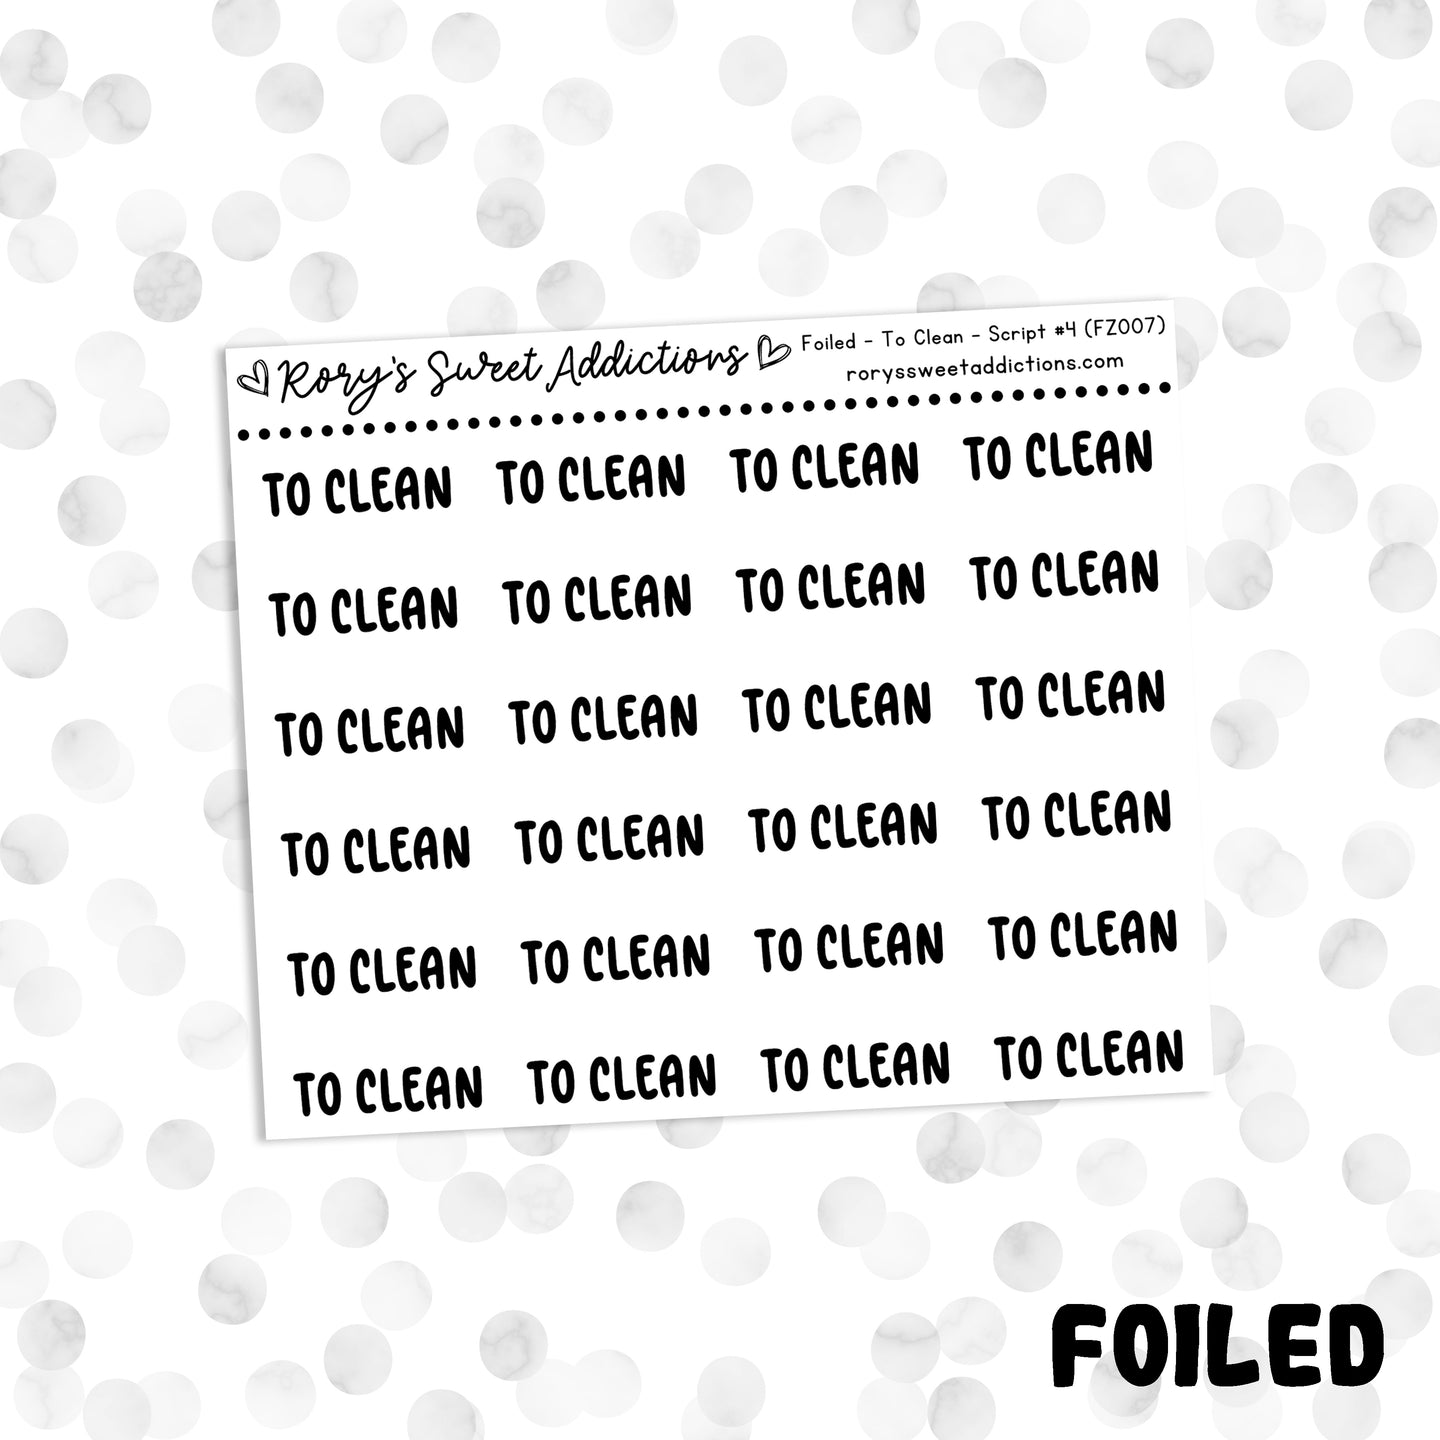 To Clean // Foiled Script #4